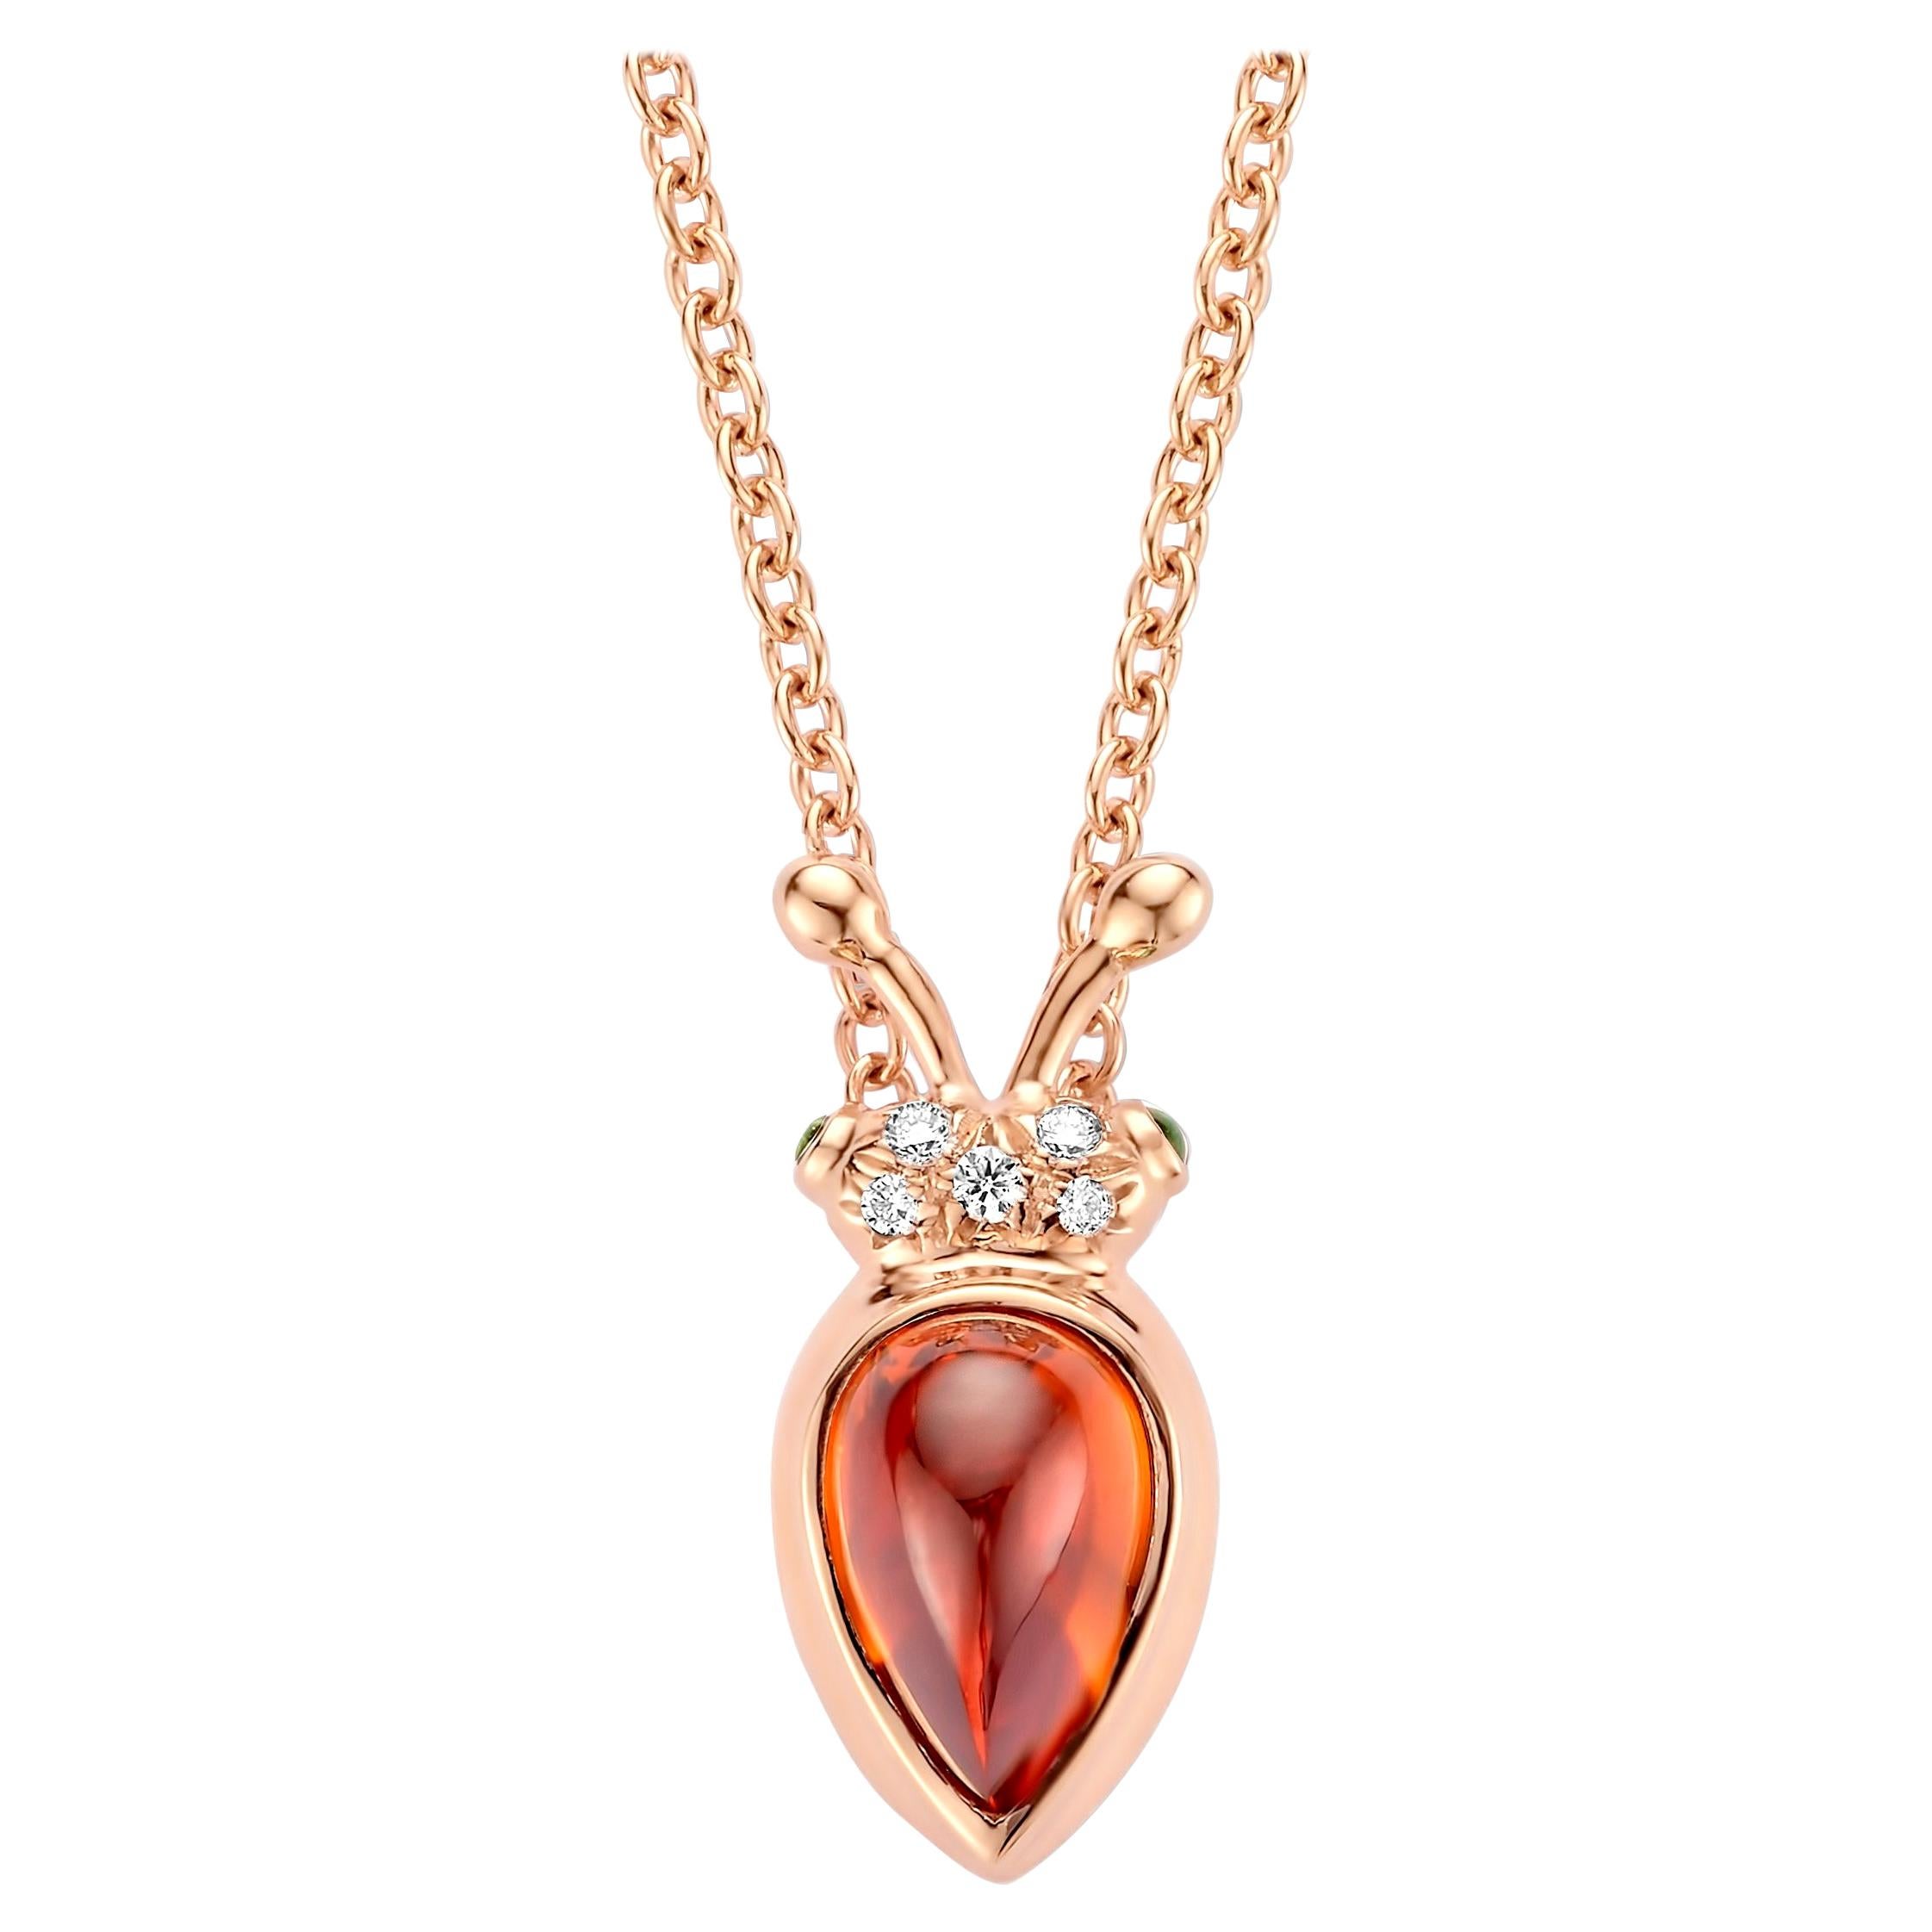 One of a kind lucky beetle necklace in 18K rose gold 6g created by jewelry designer Celine Roelens. This necklace is set with the finest diamonds in brilliant cut 0,04Ct (VVS/DEF quality) and one natural, mandarin  garnet in pear cabouchon cut